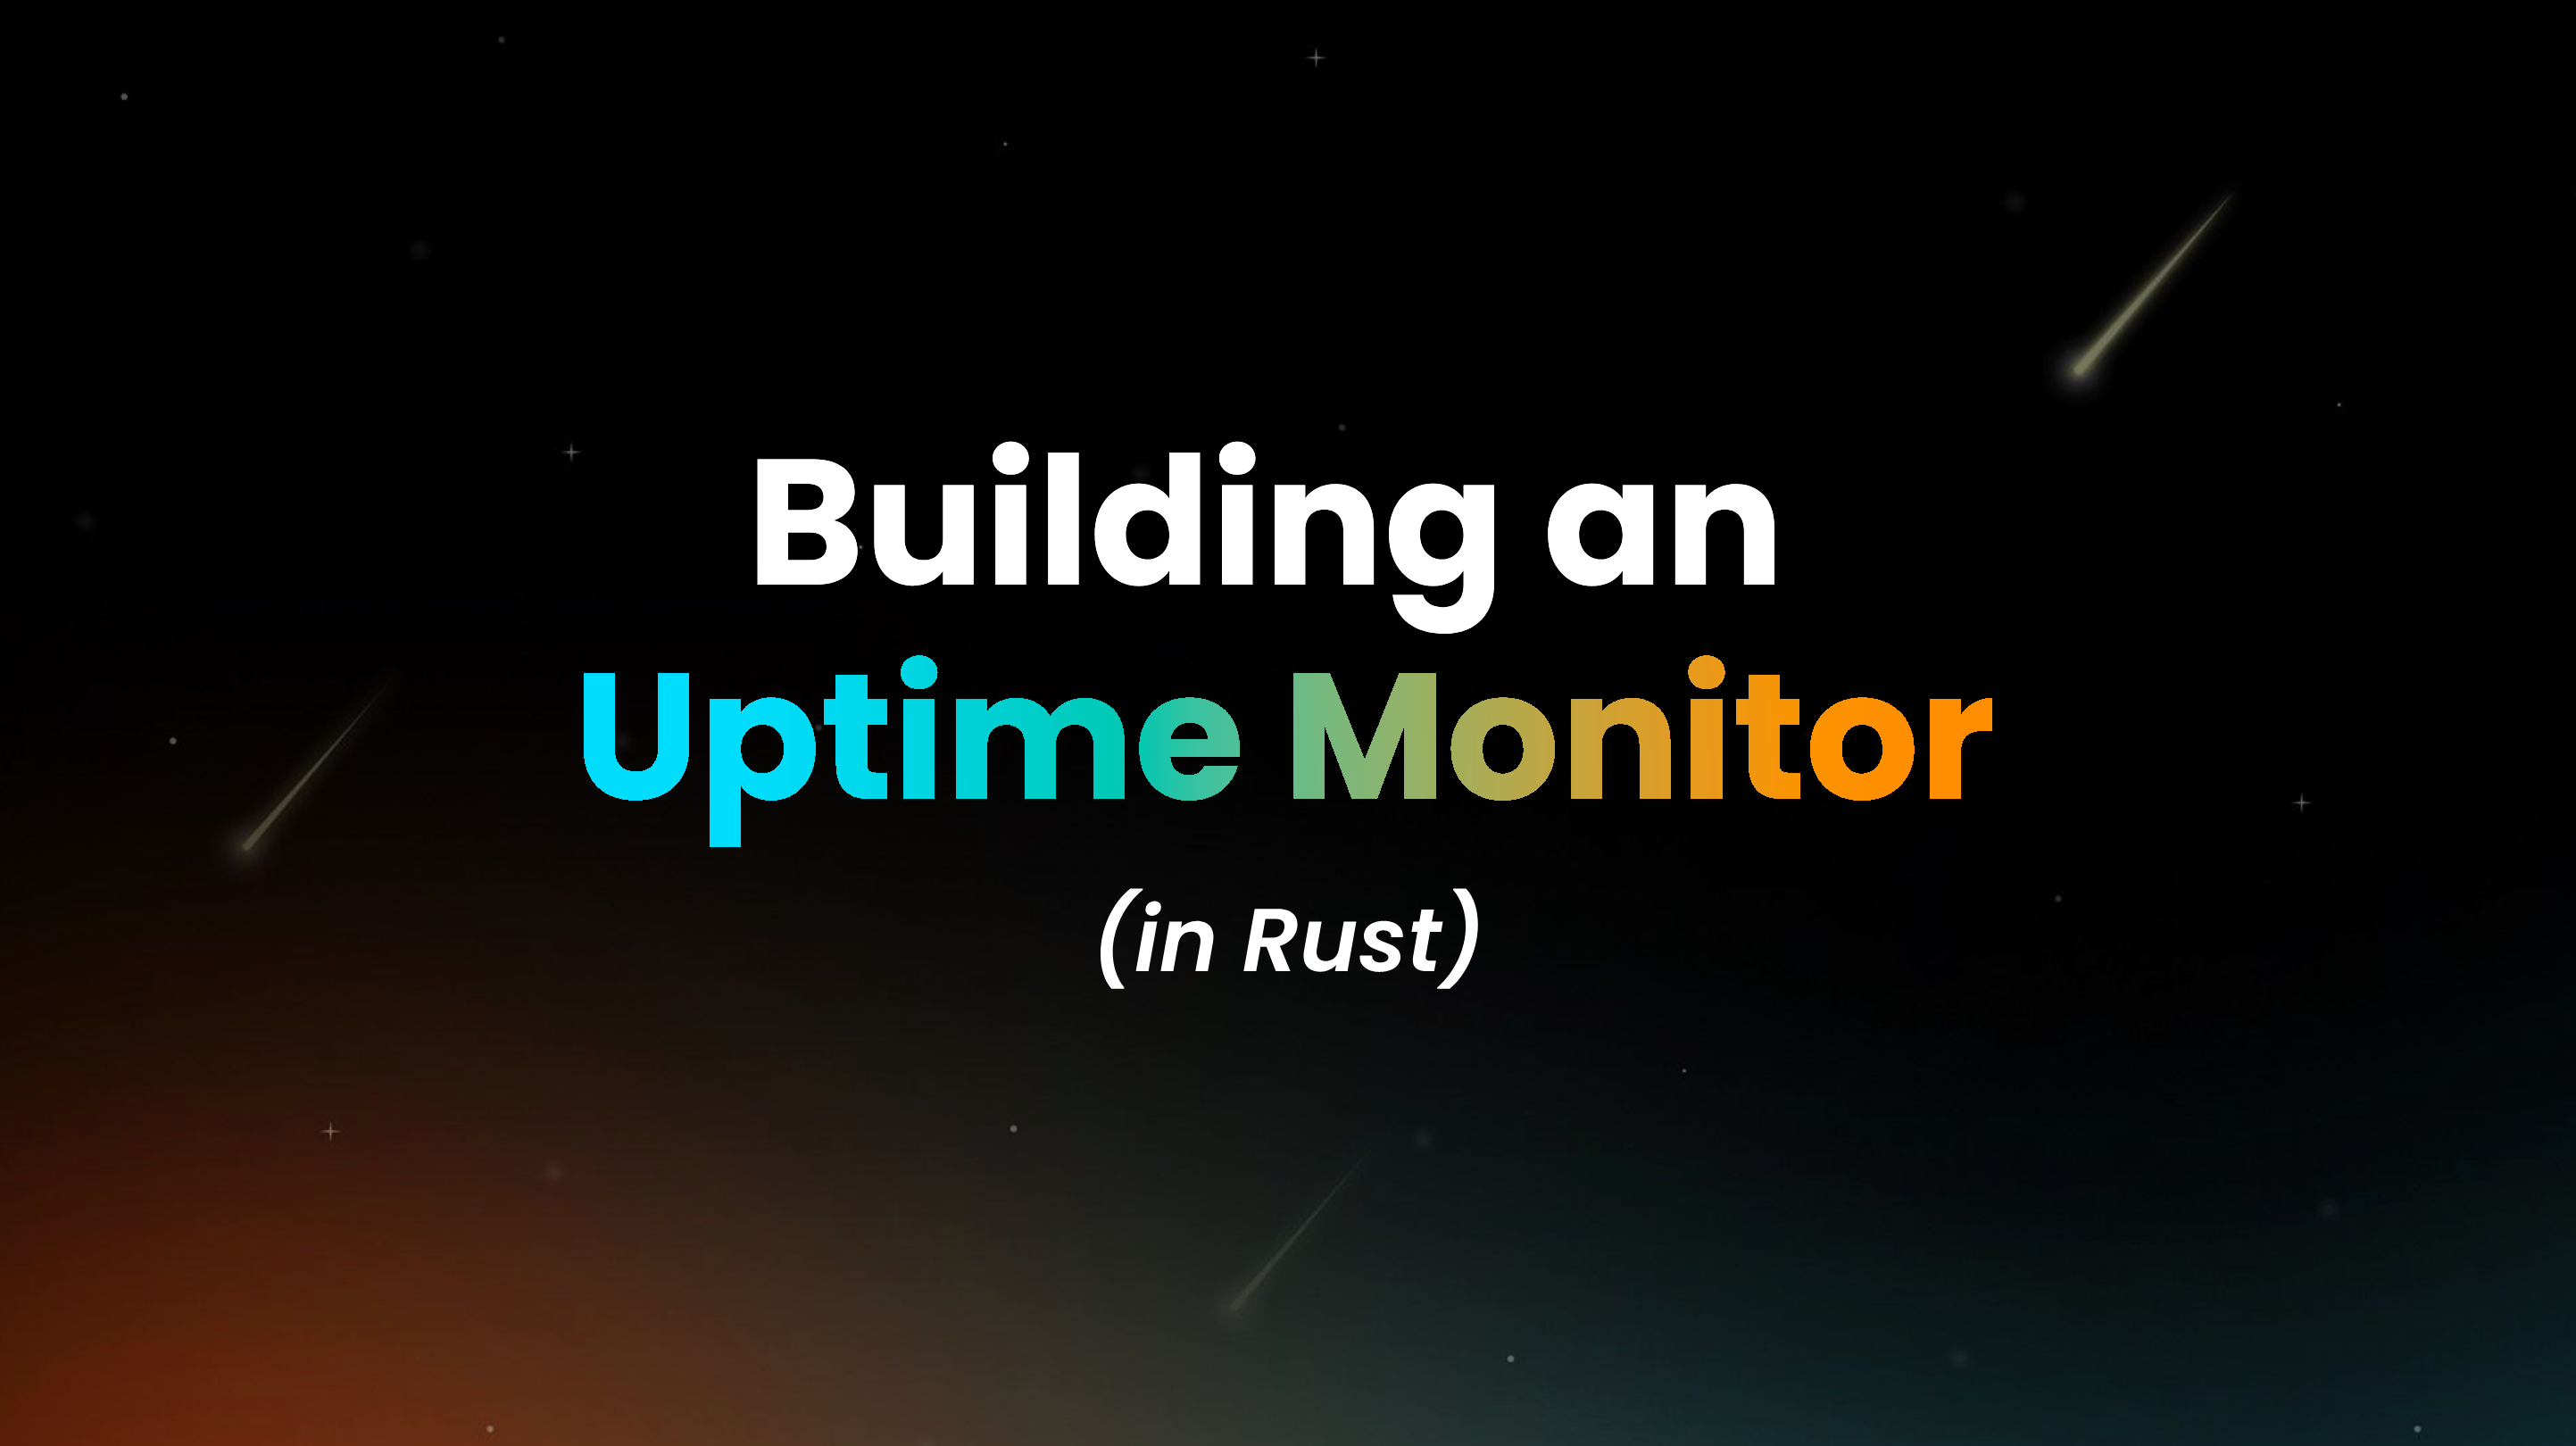 Building an Uptime Monitor in Rust